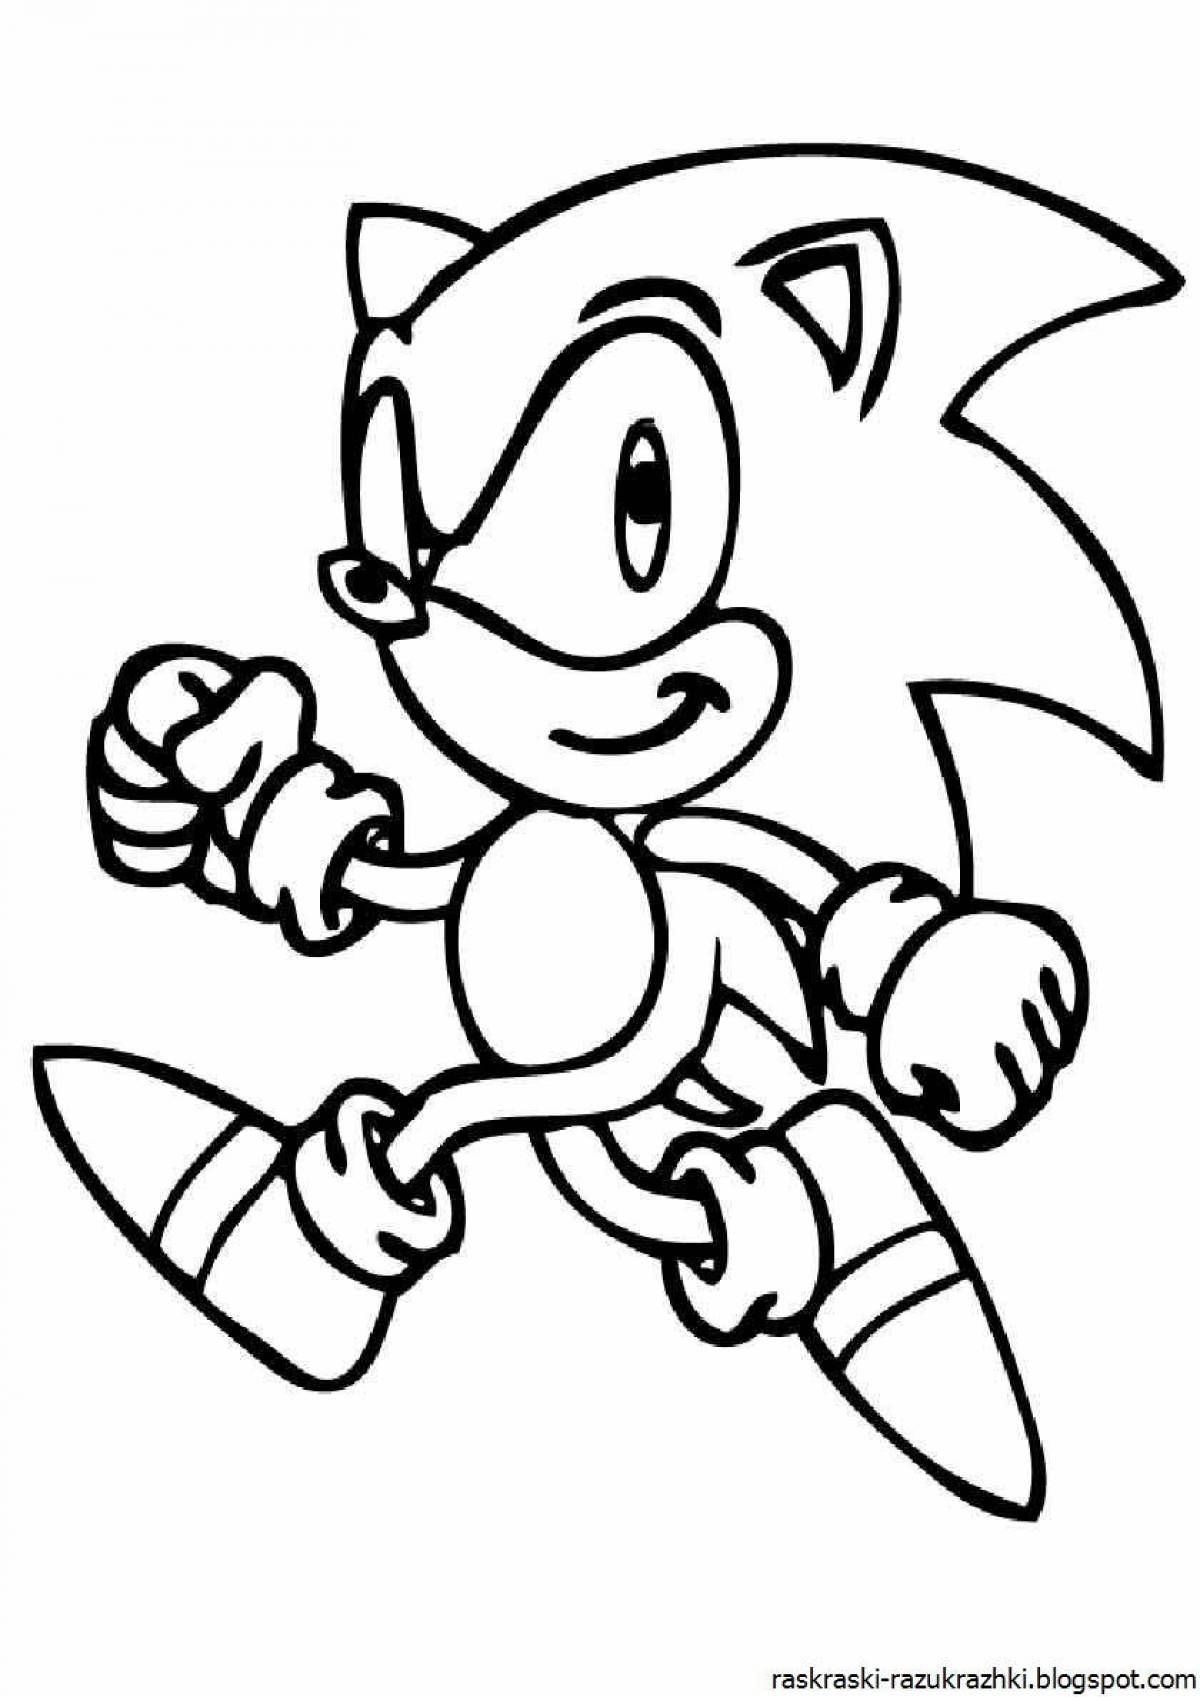 Shiny sonic coloring book